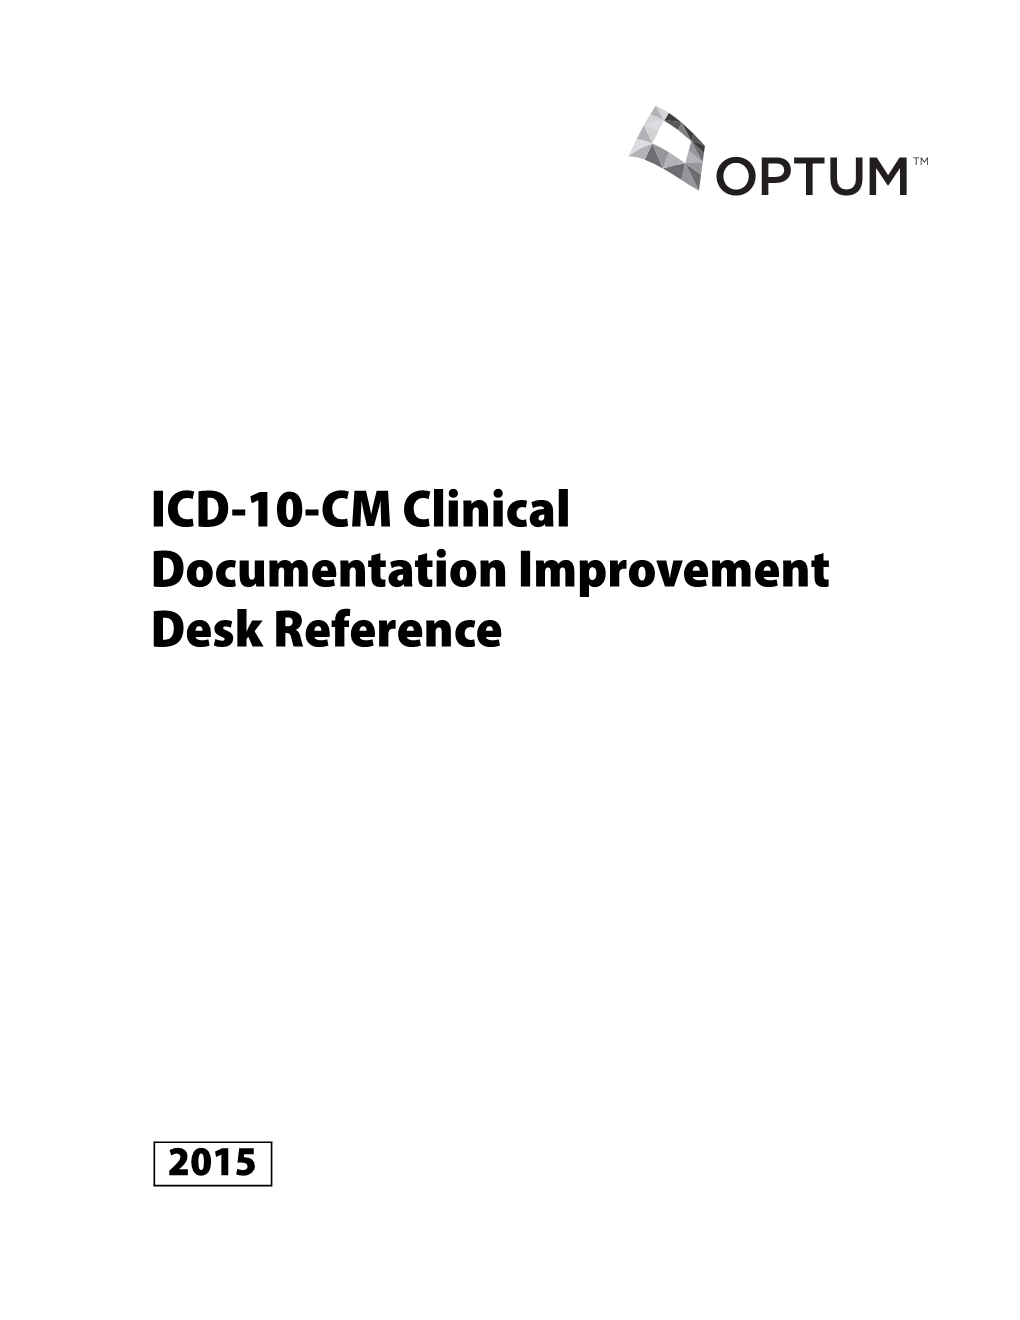 ICD-10-CM Clinical Documentation Improvement Desk Reference